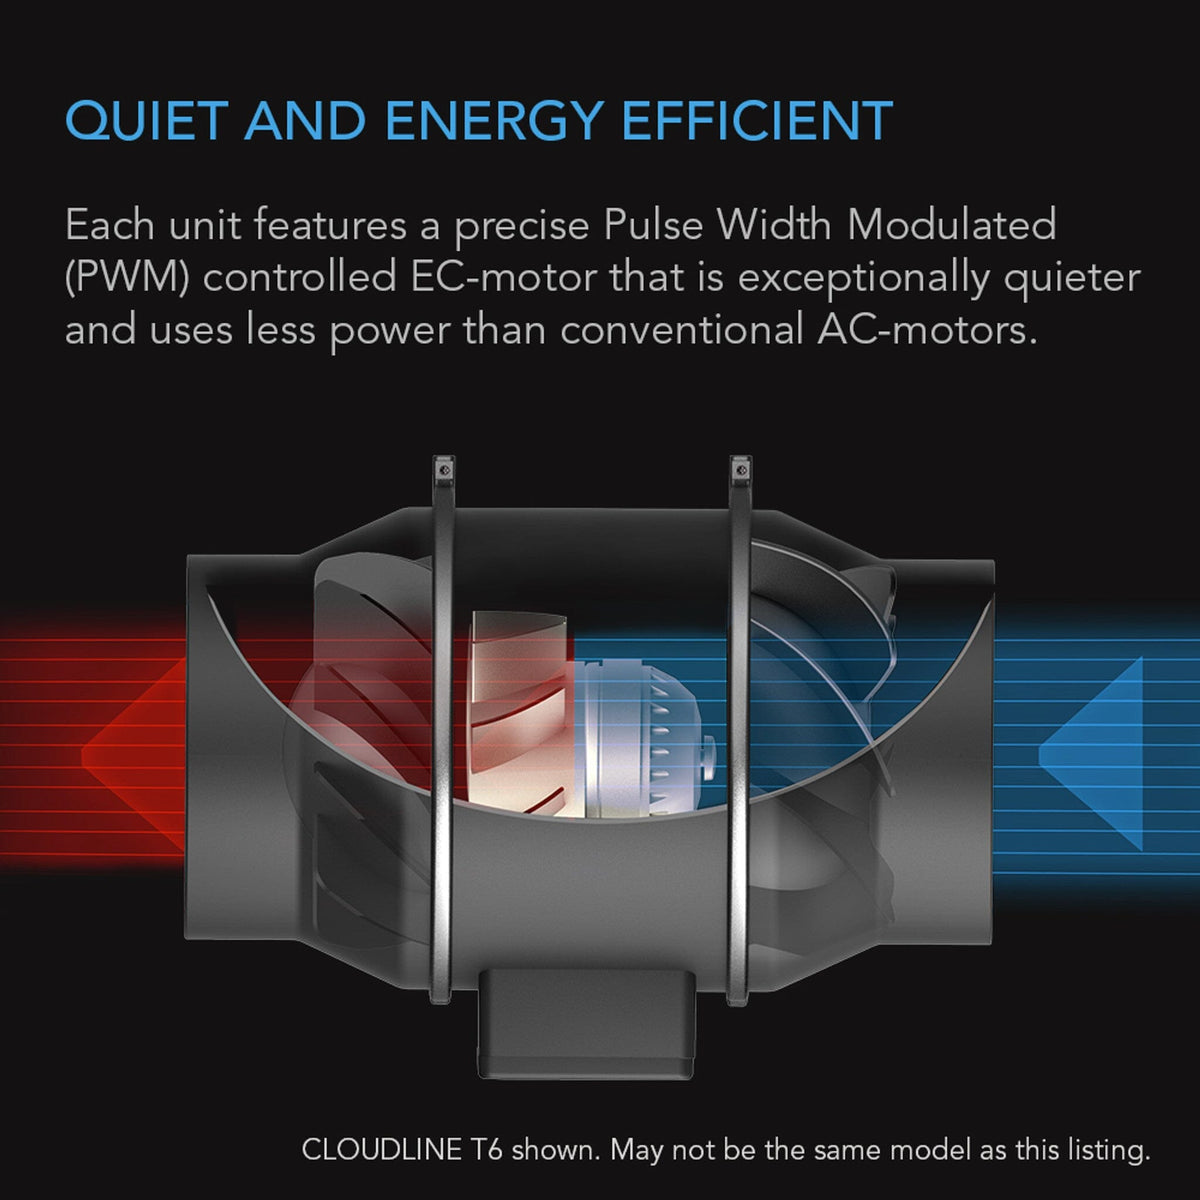 Queit and Energy Efficient system with PWM motor